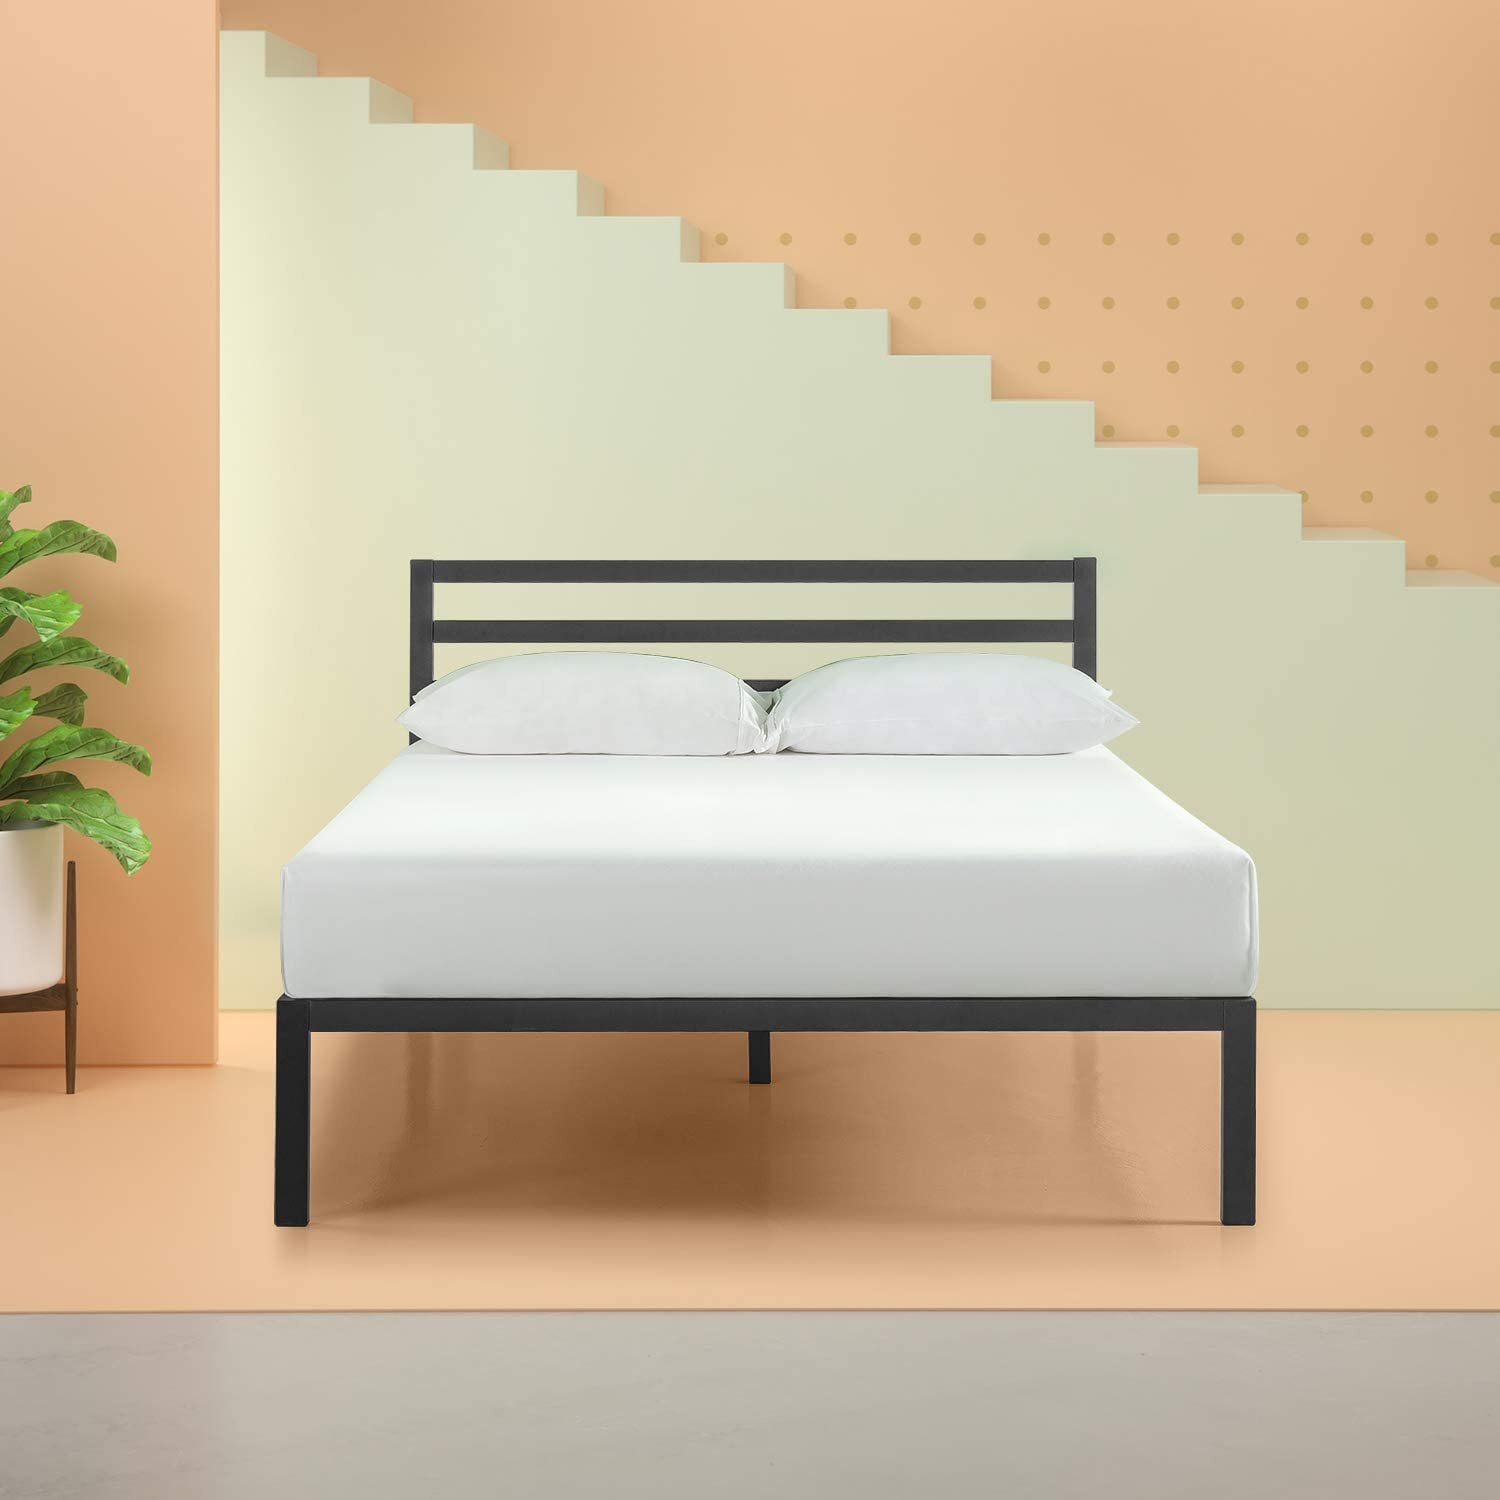 Platform Metal Bed Frame FOR  Memory Foam or Mattress TWIN FULL QUEEN KING New 